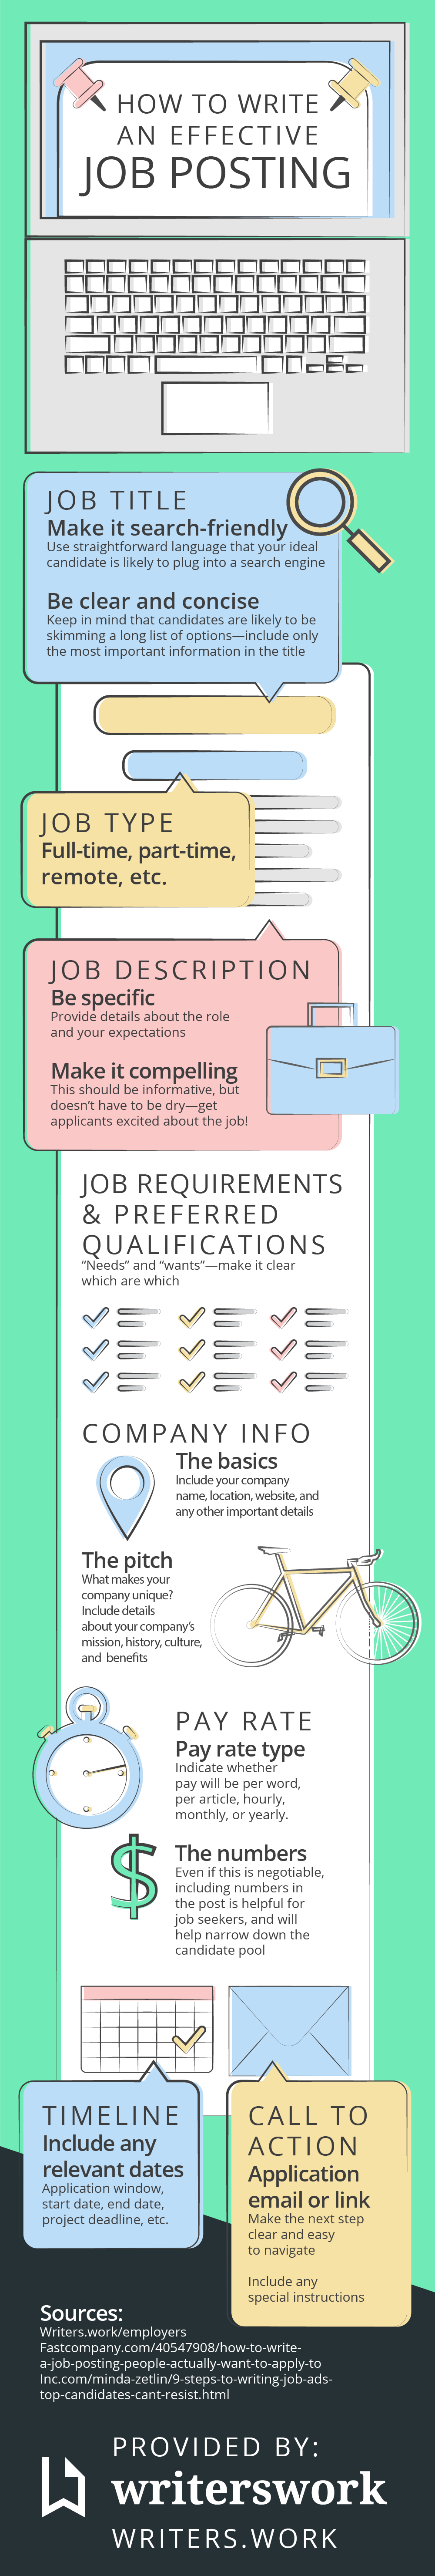 Infographic with tips for posting a job and hiring freelance writers